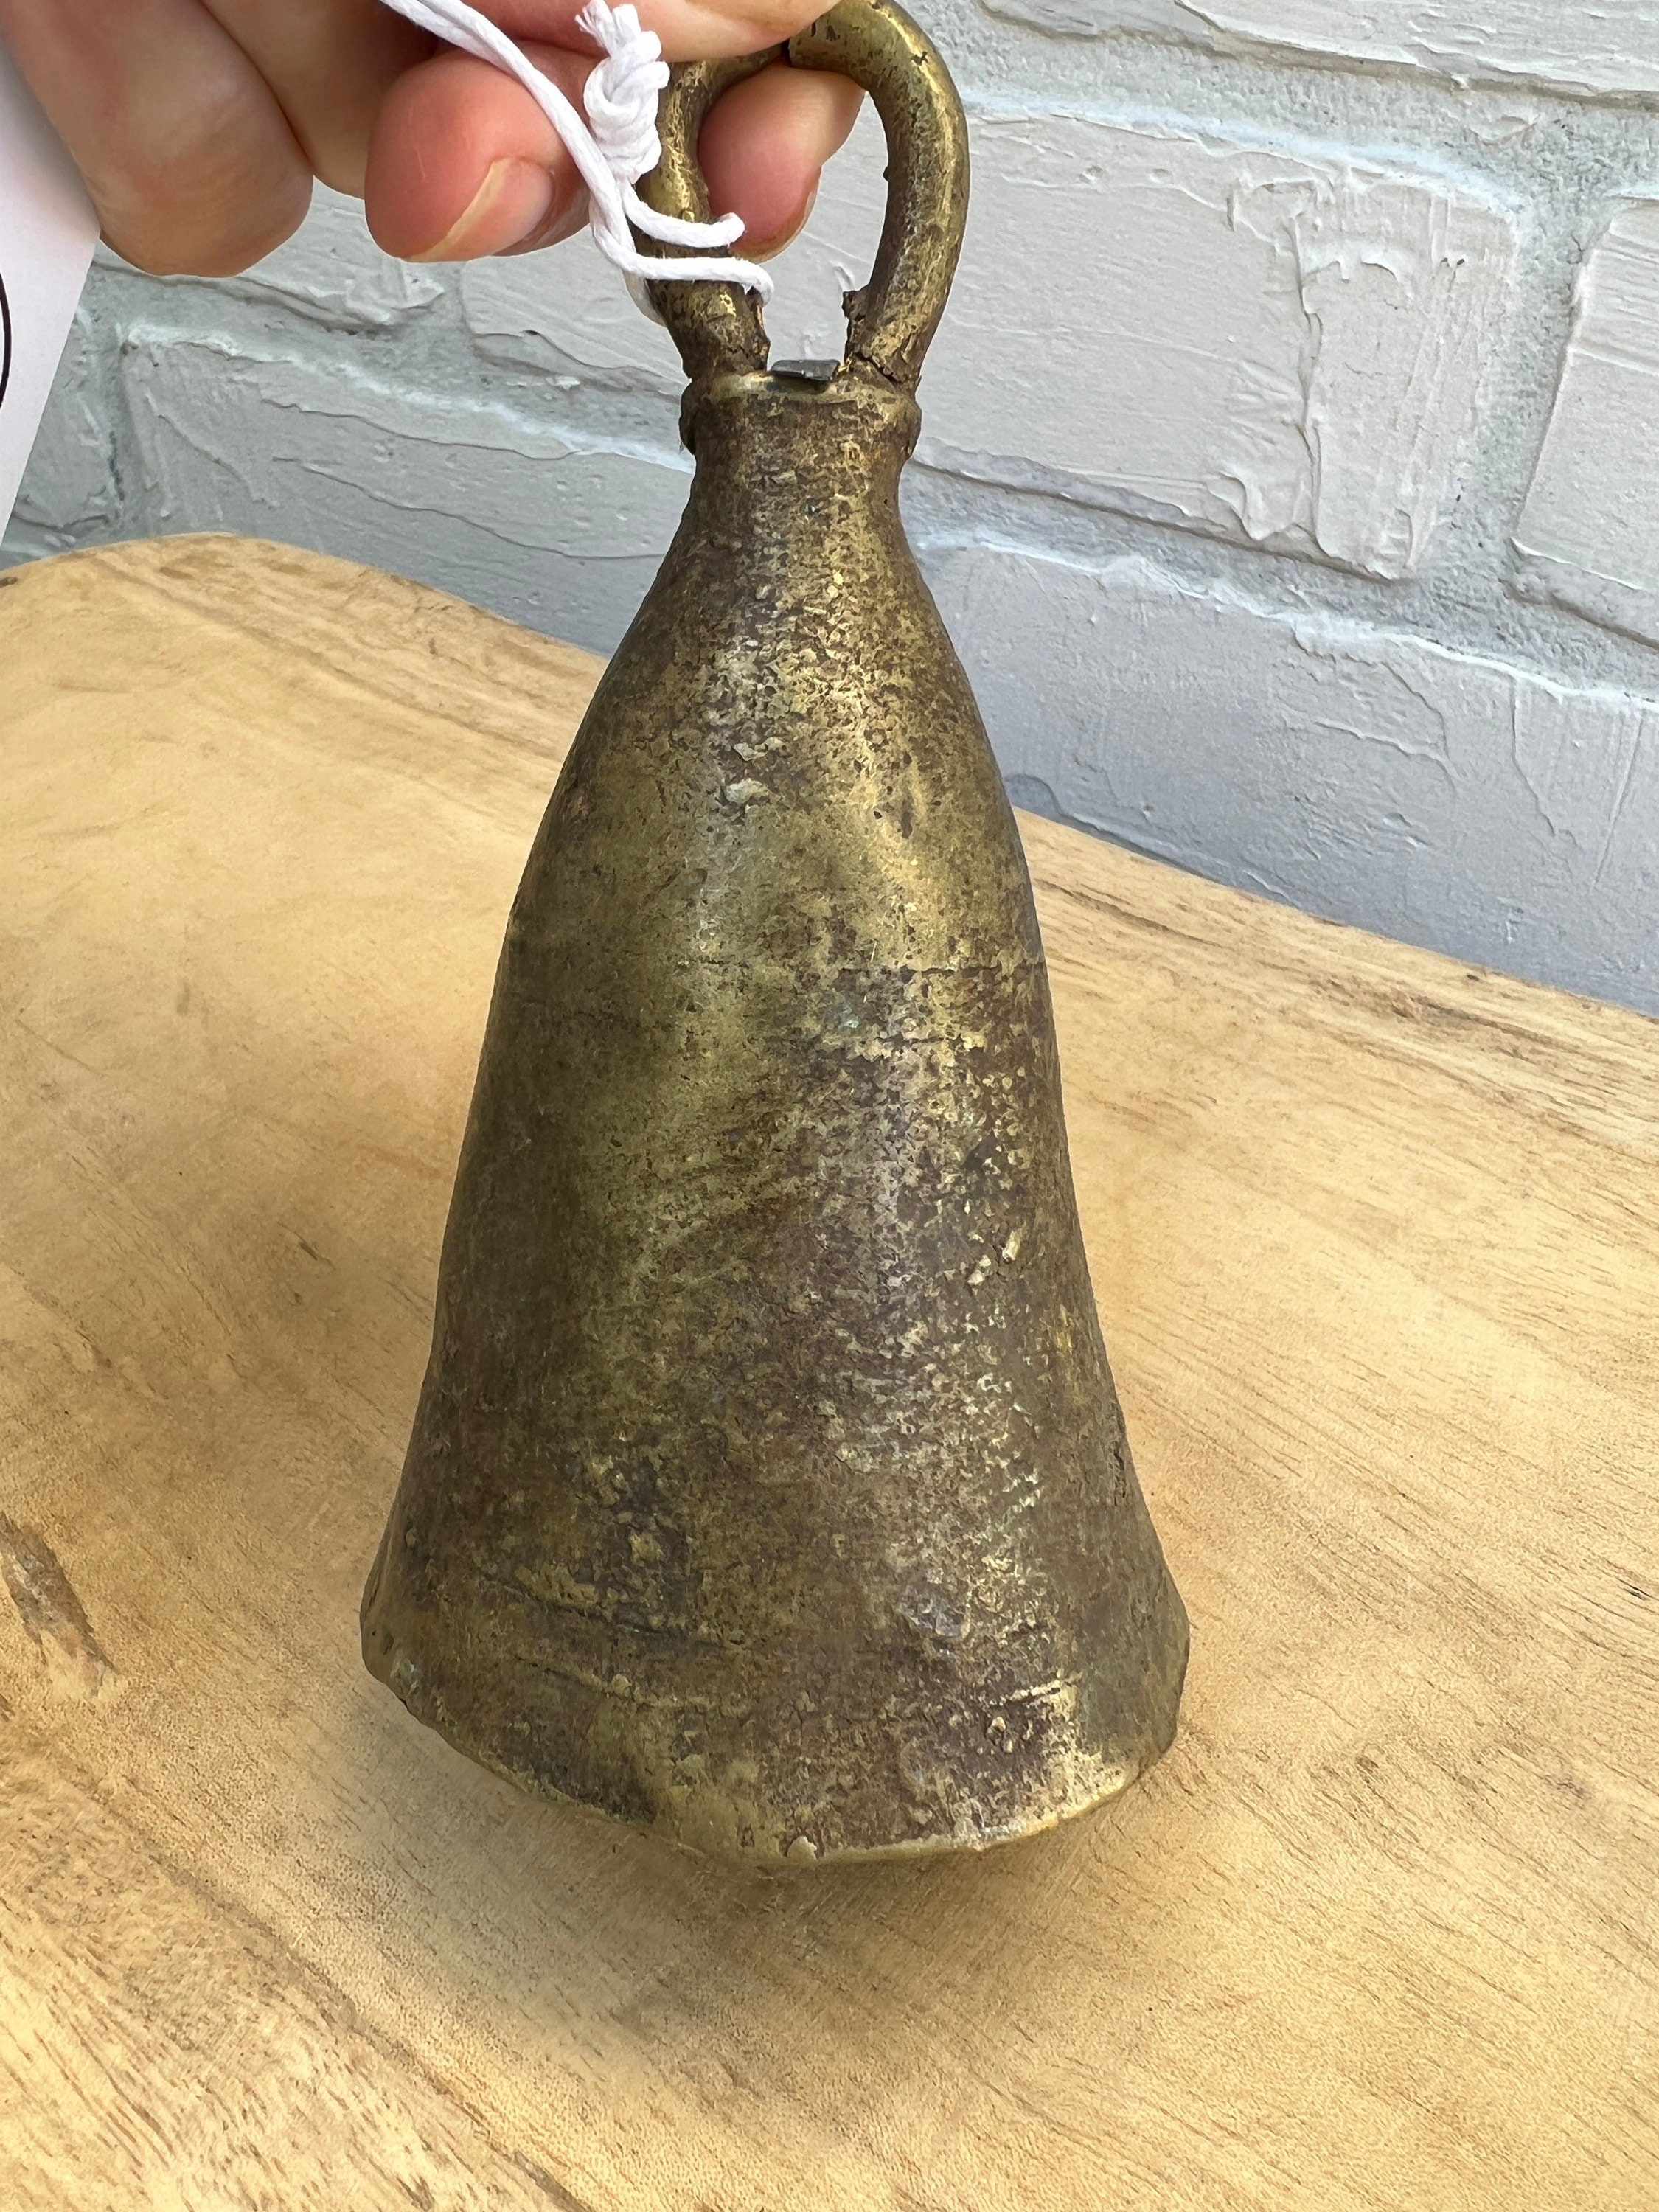 Vintage, Large Brass Cow Bell, African hand made brass bell, Home